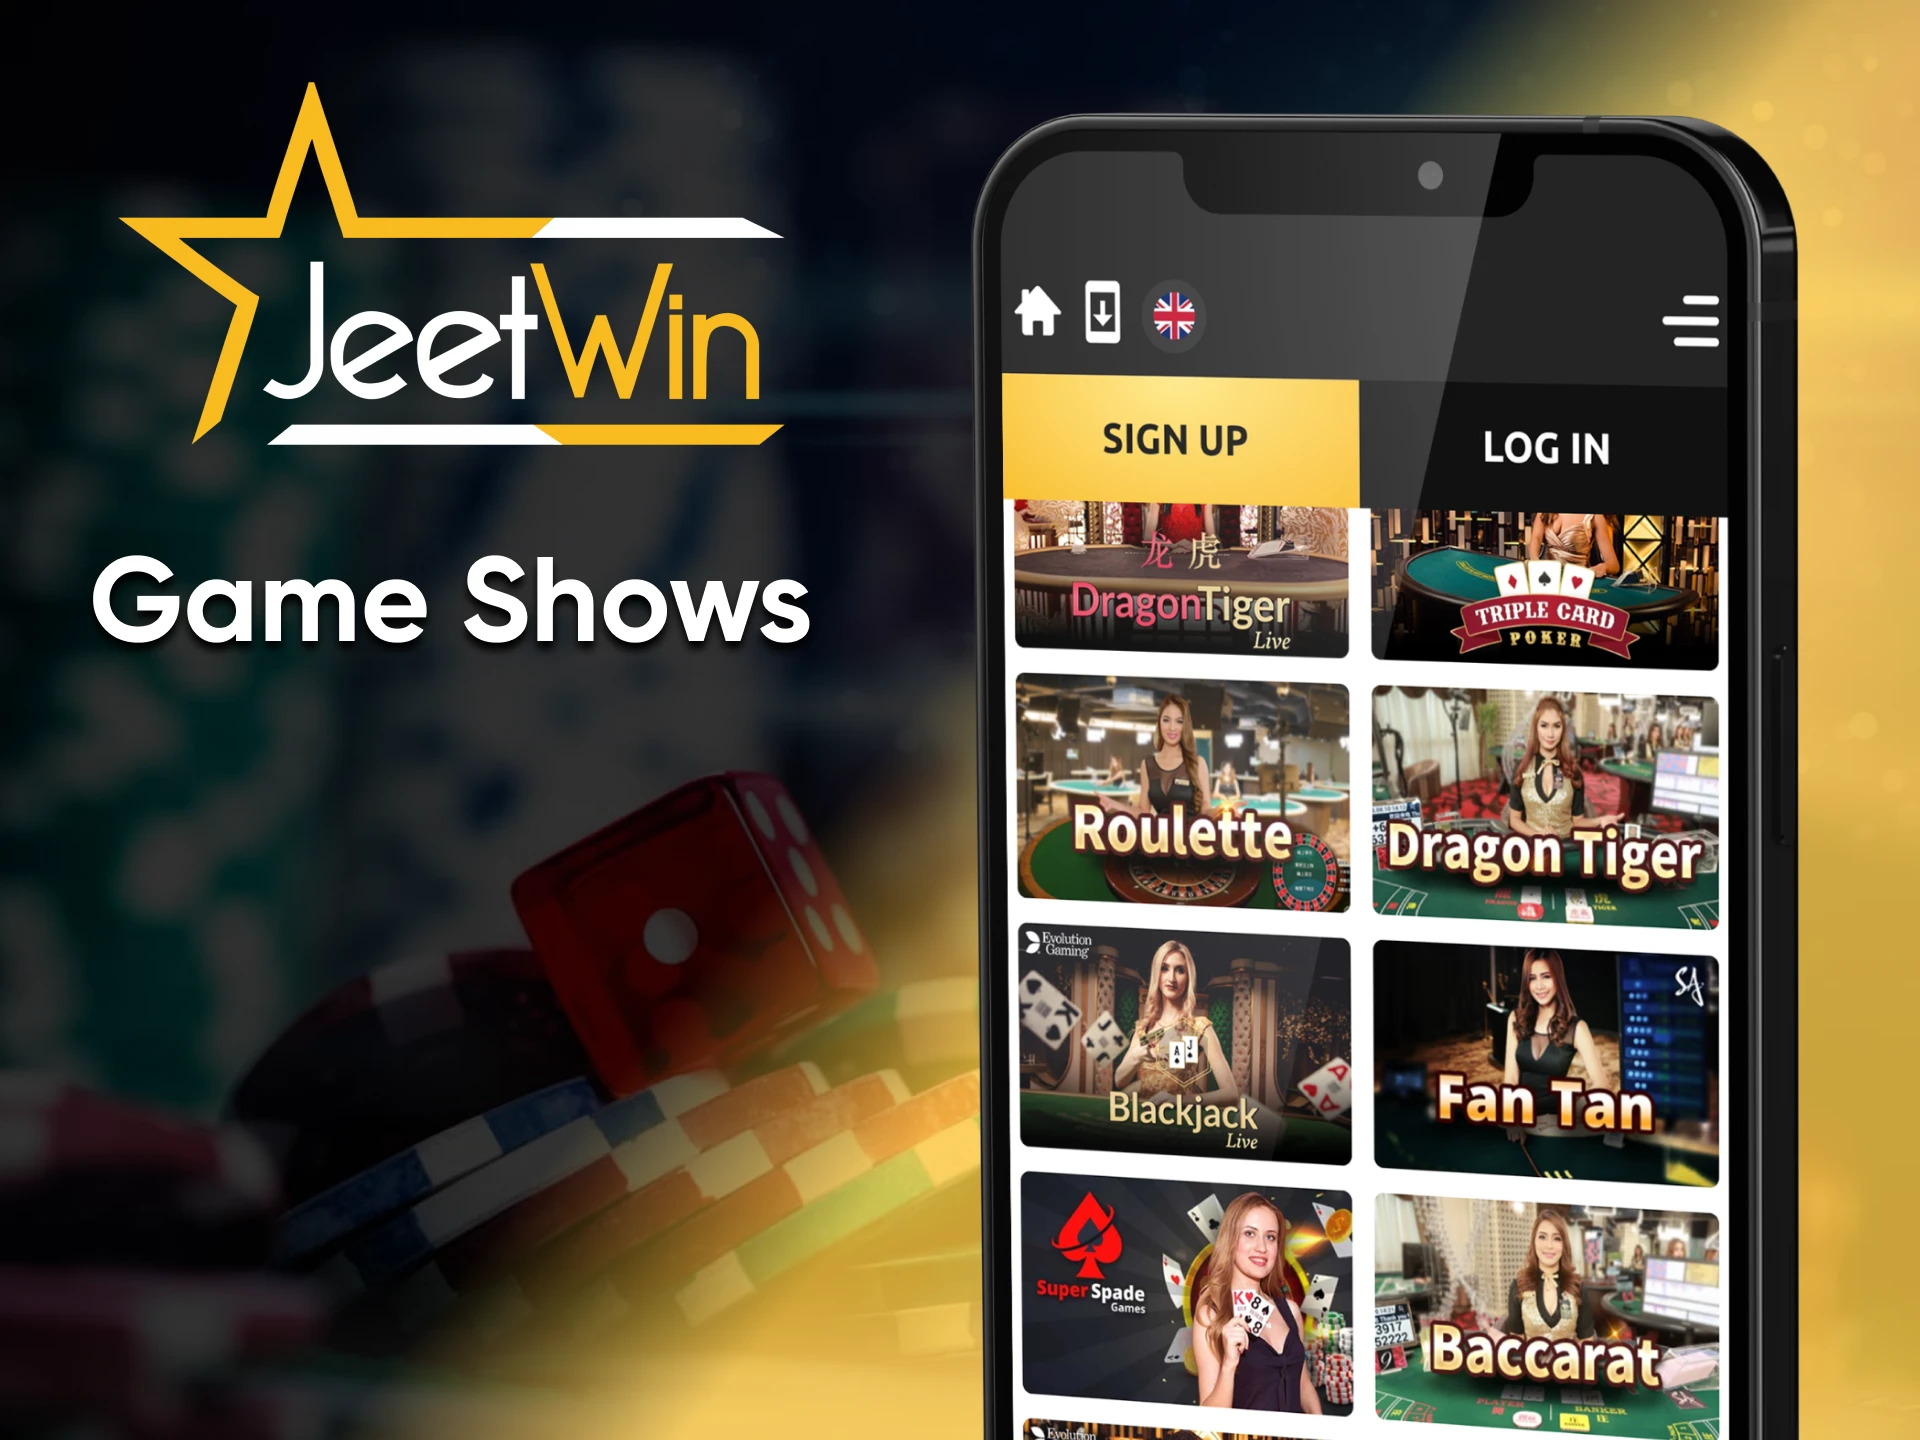 Game Show is a game that you can play on Jeetwin.